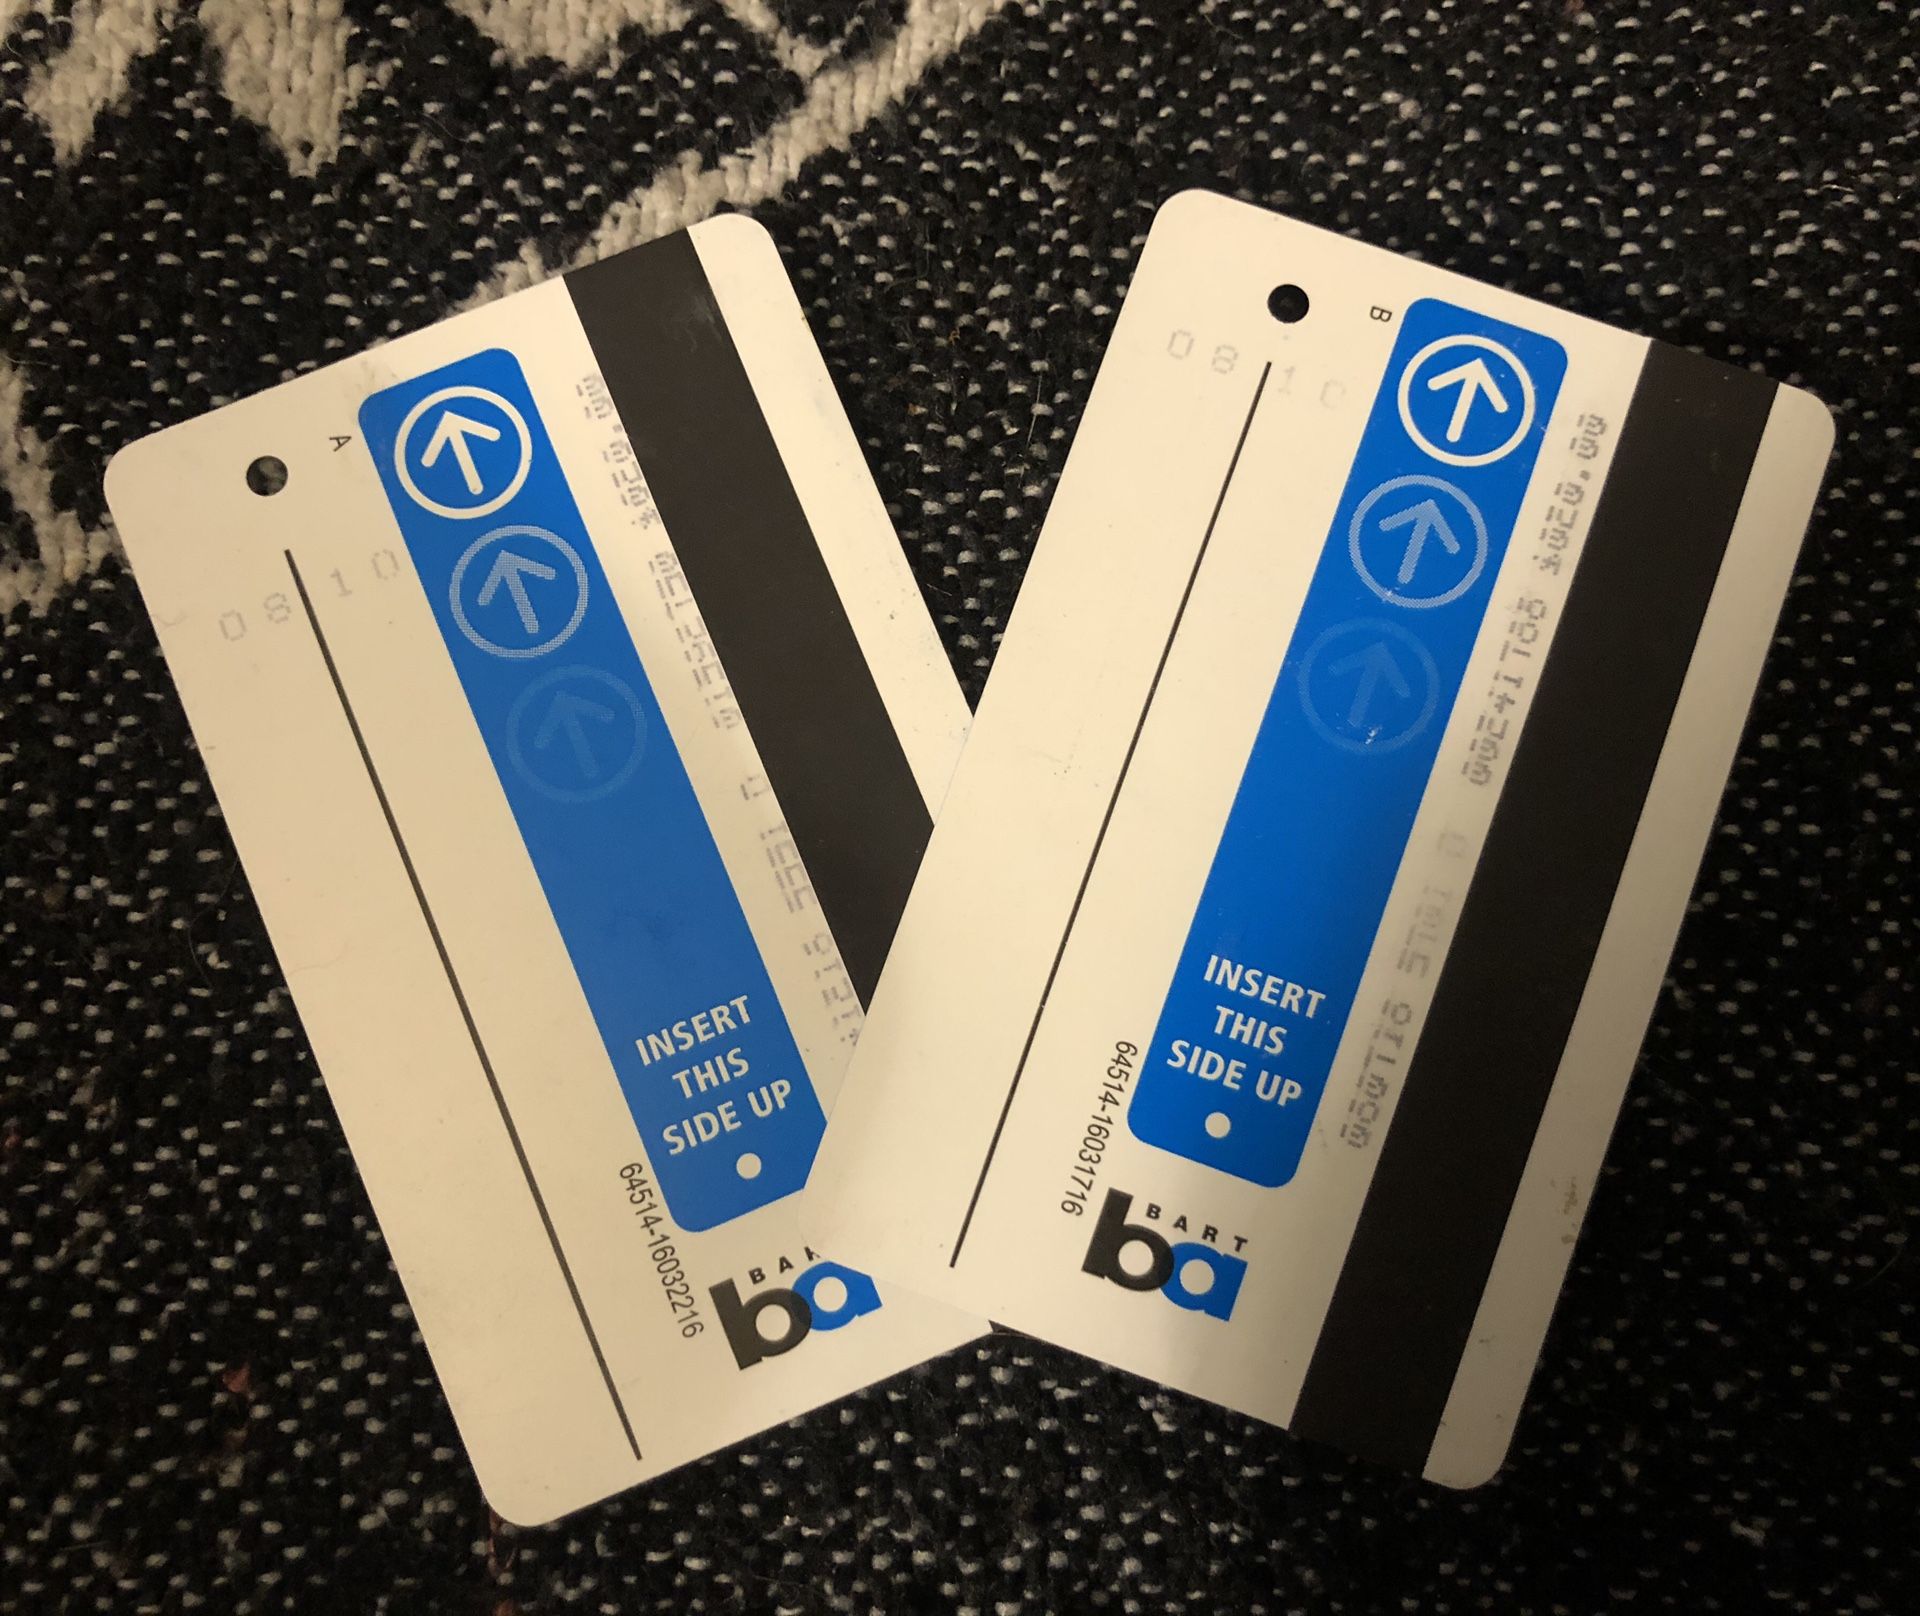 Bart Tickets With $20 Each In It